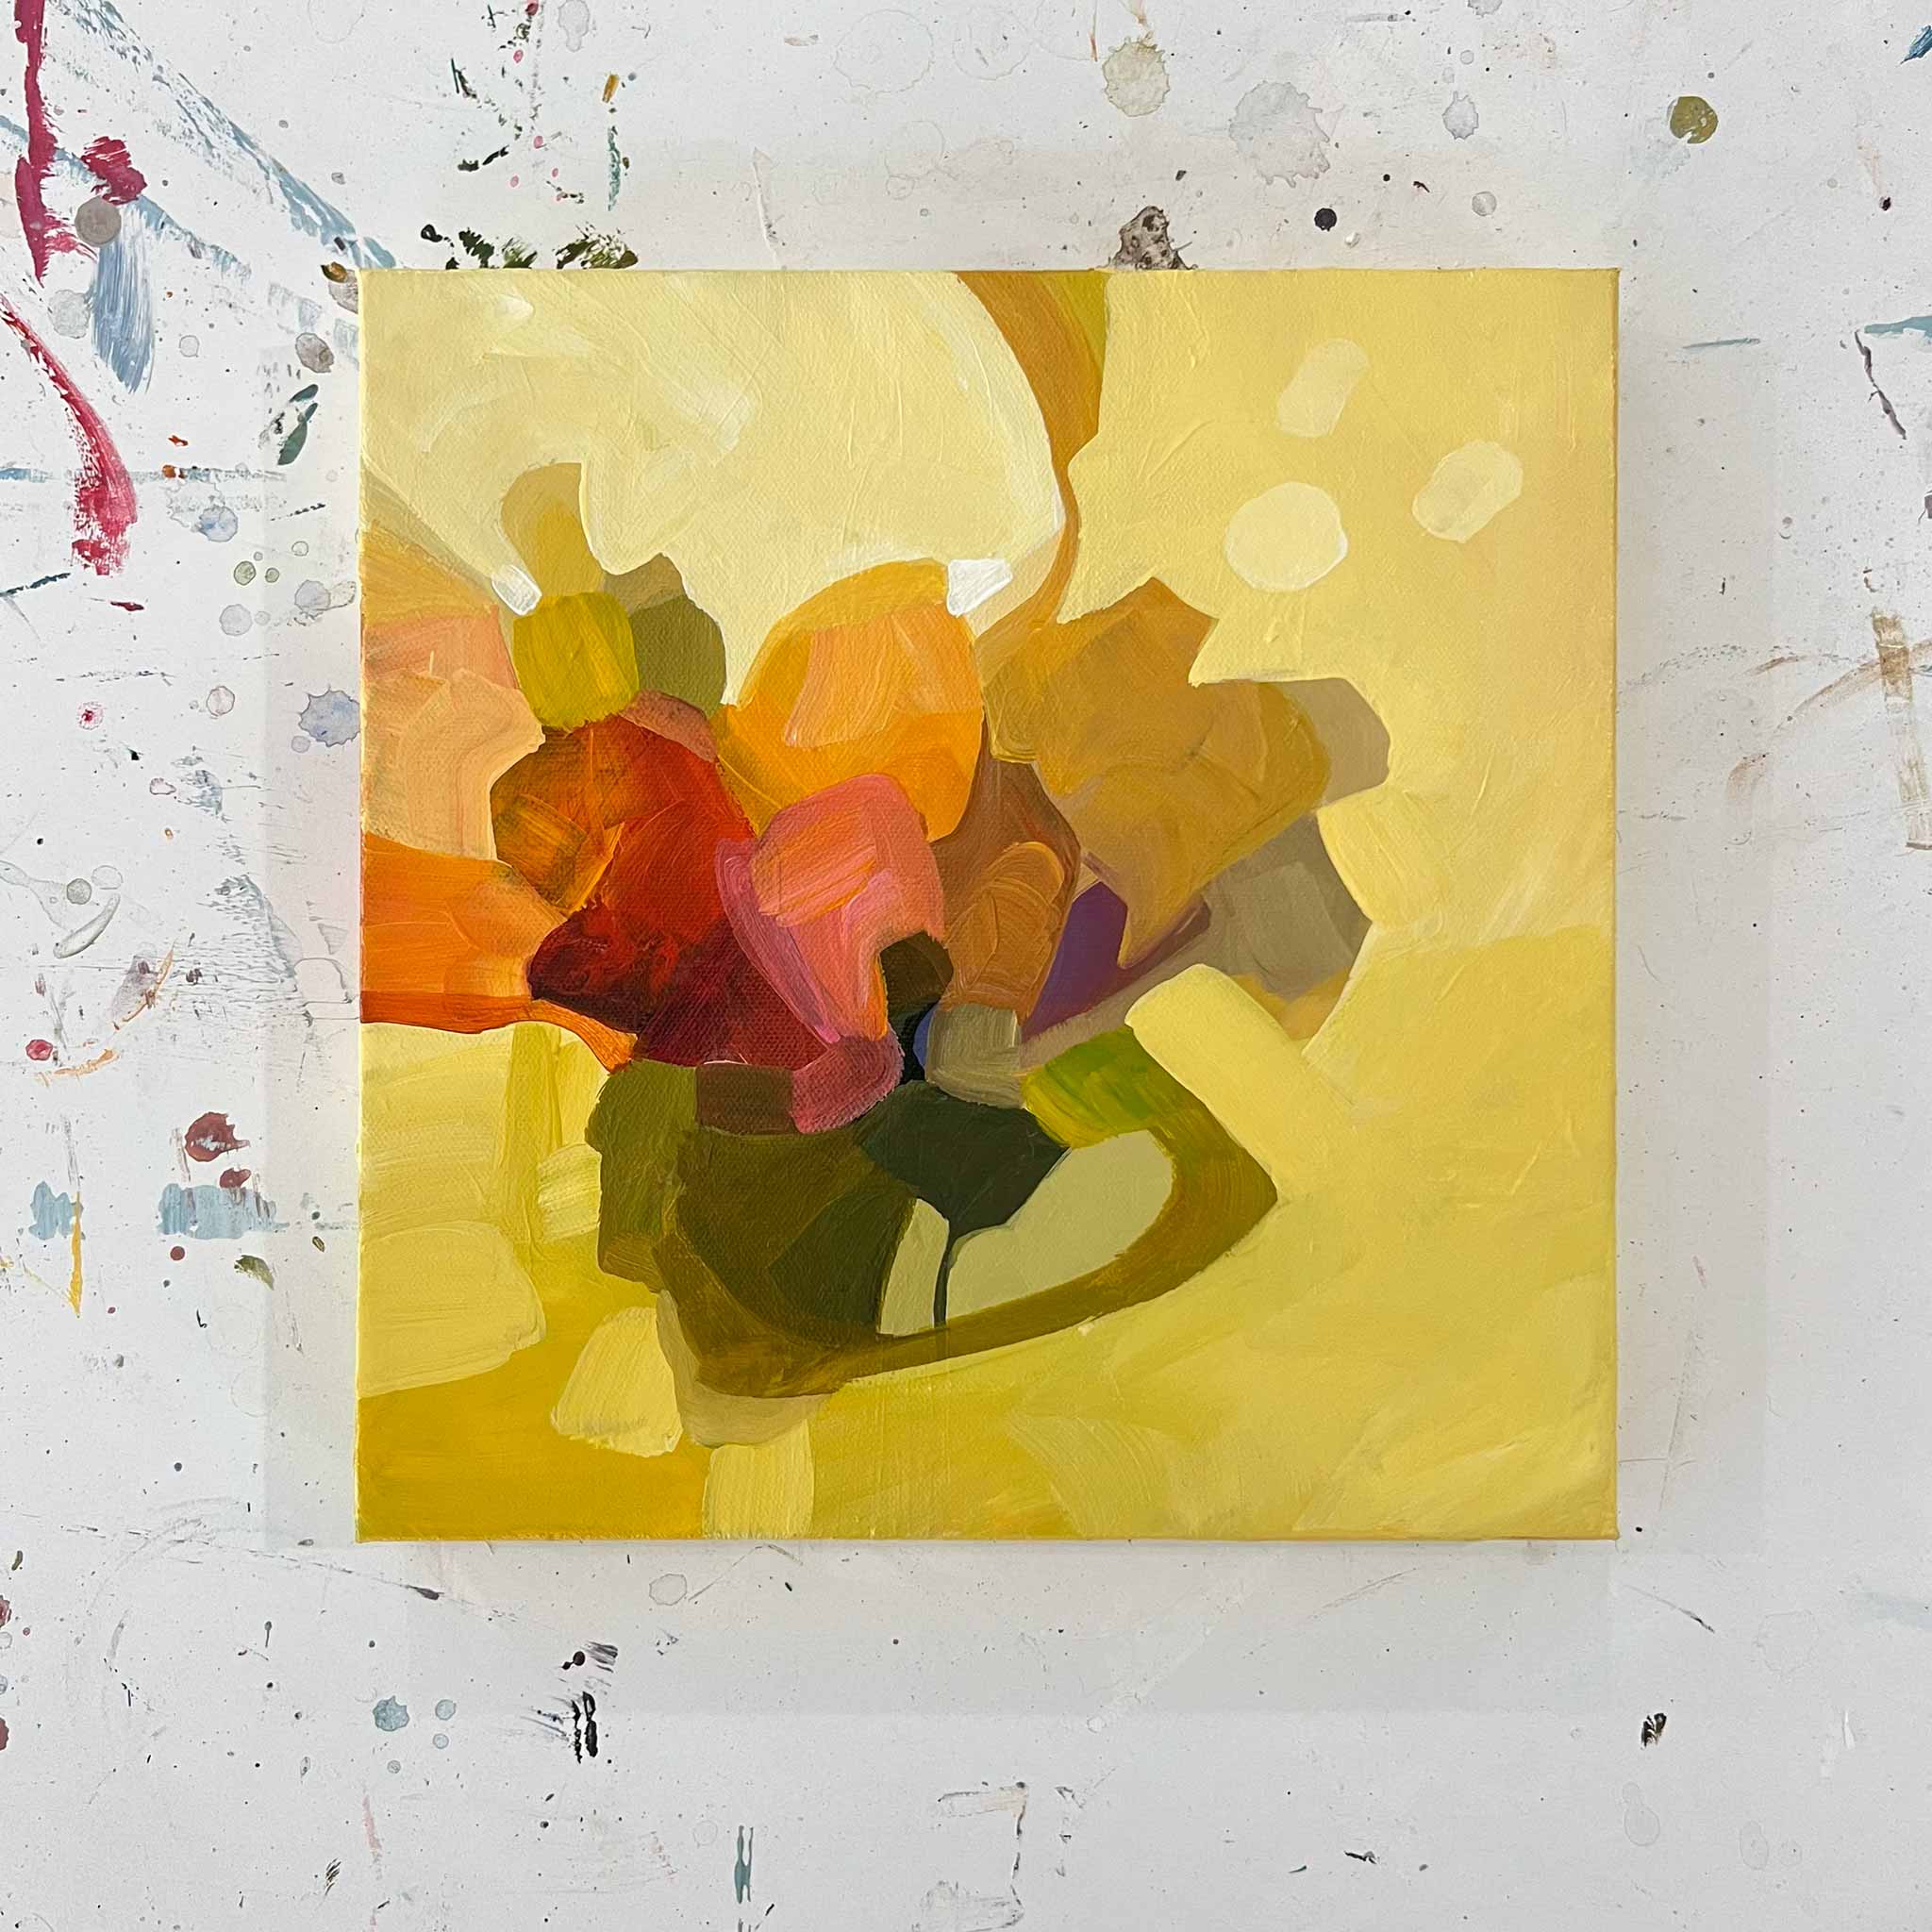 12x12 yellow abstract flower painting by Canadian abstract artist Susannah Bleasby